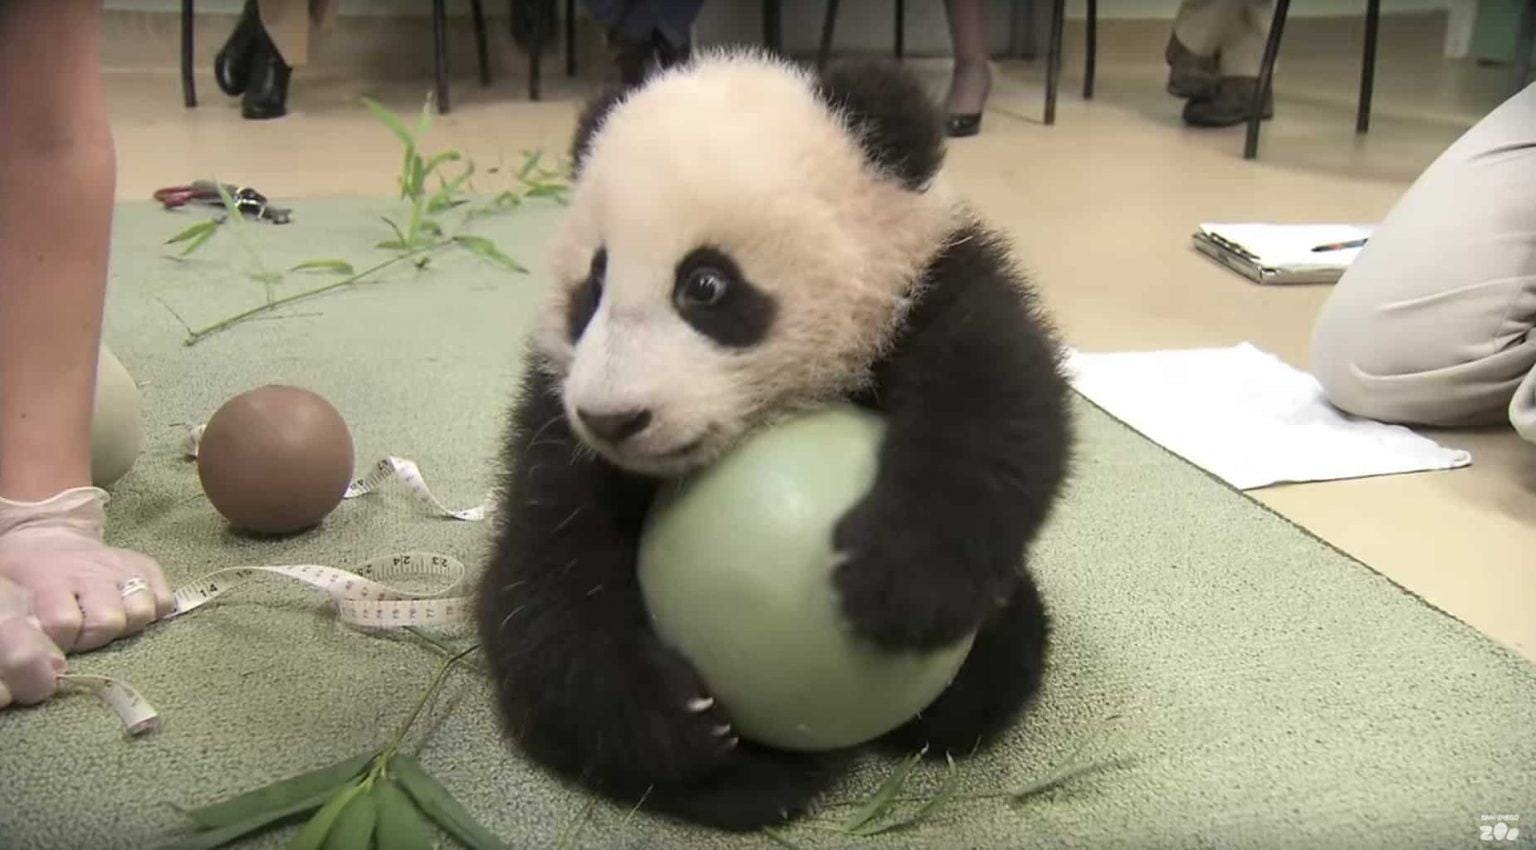 Pandas have the cutest rage when they try to get his ball